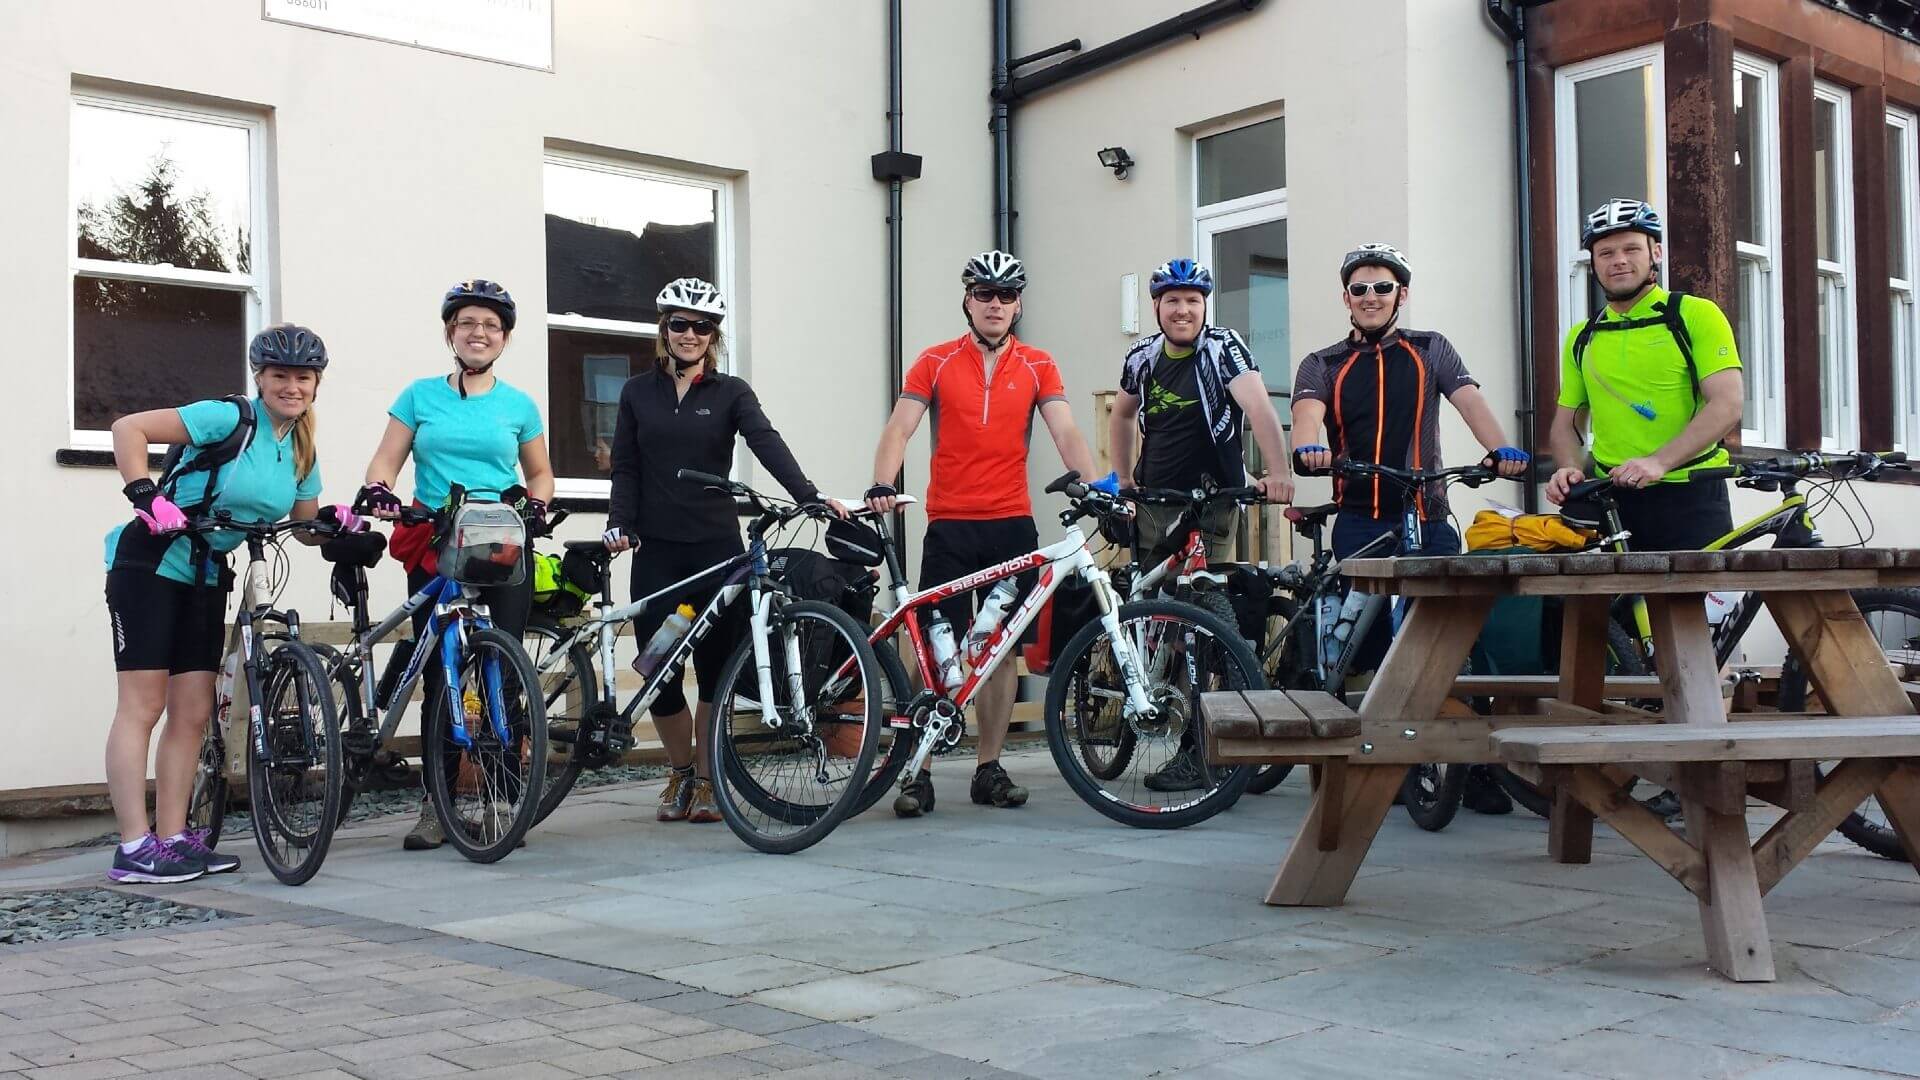 C2C cycle route - Wayfarers Independent Hostel